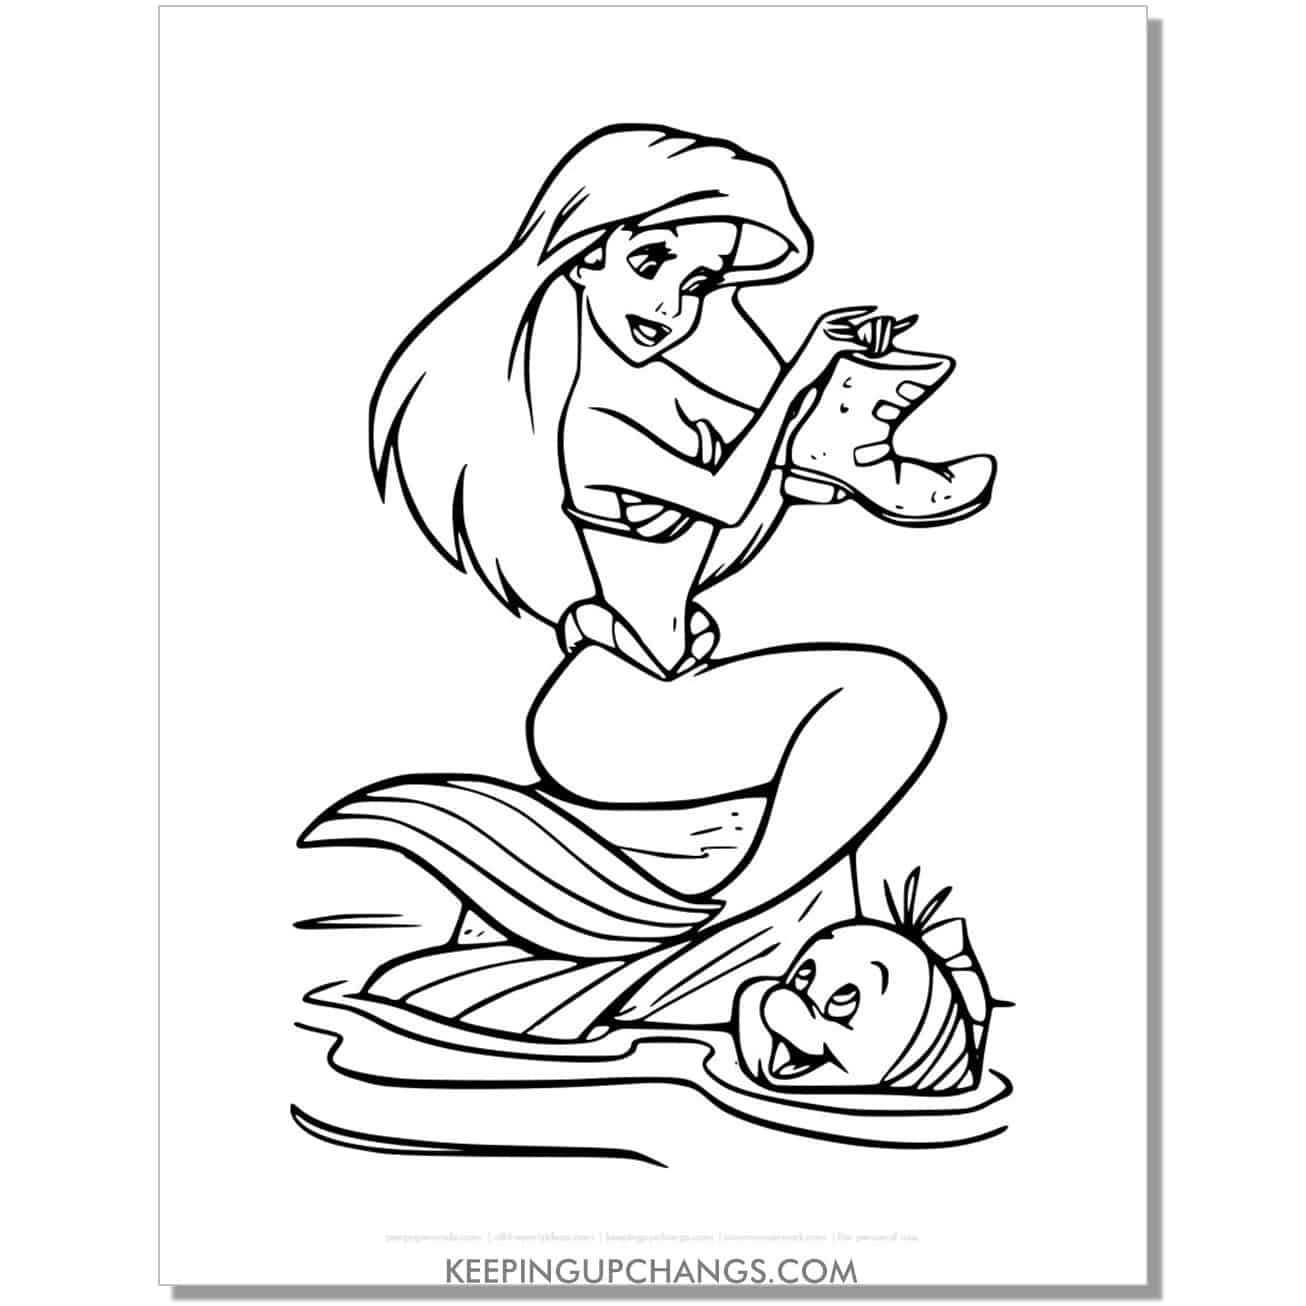 little mermaid ariel, flounder find old boot coloring page, sheet.